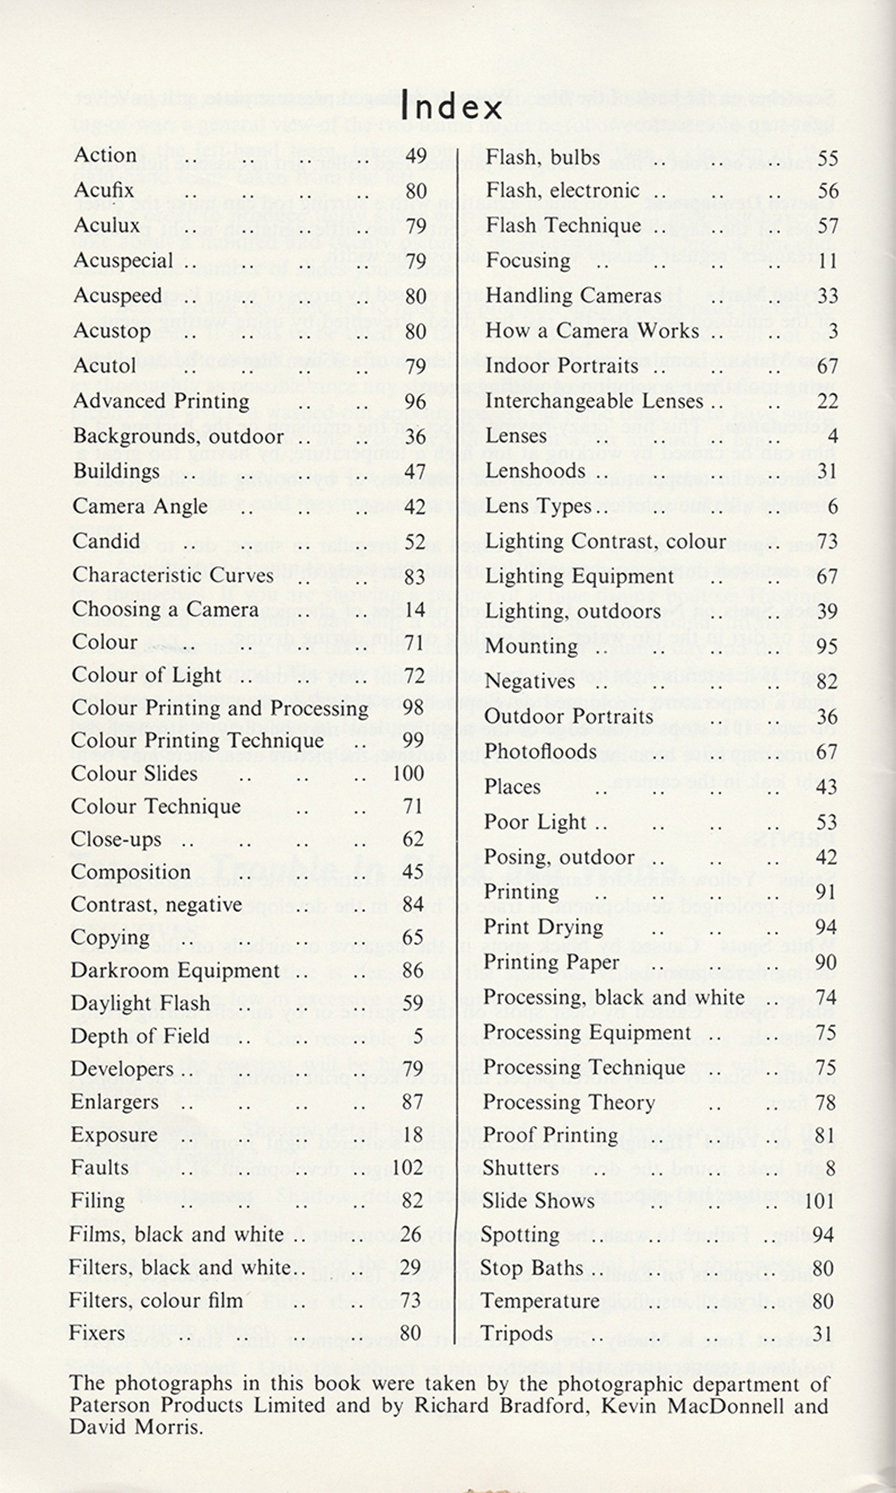 image of an index page